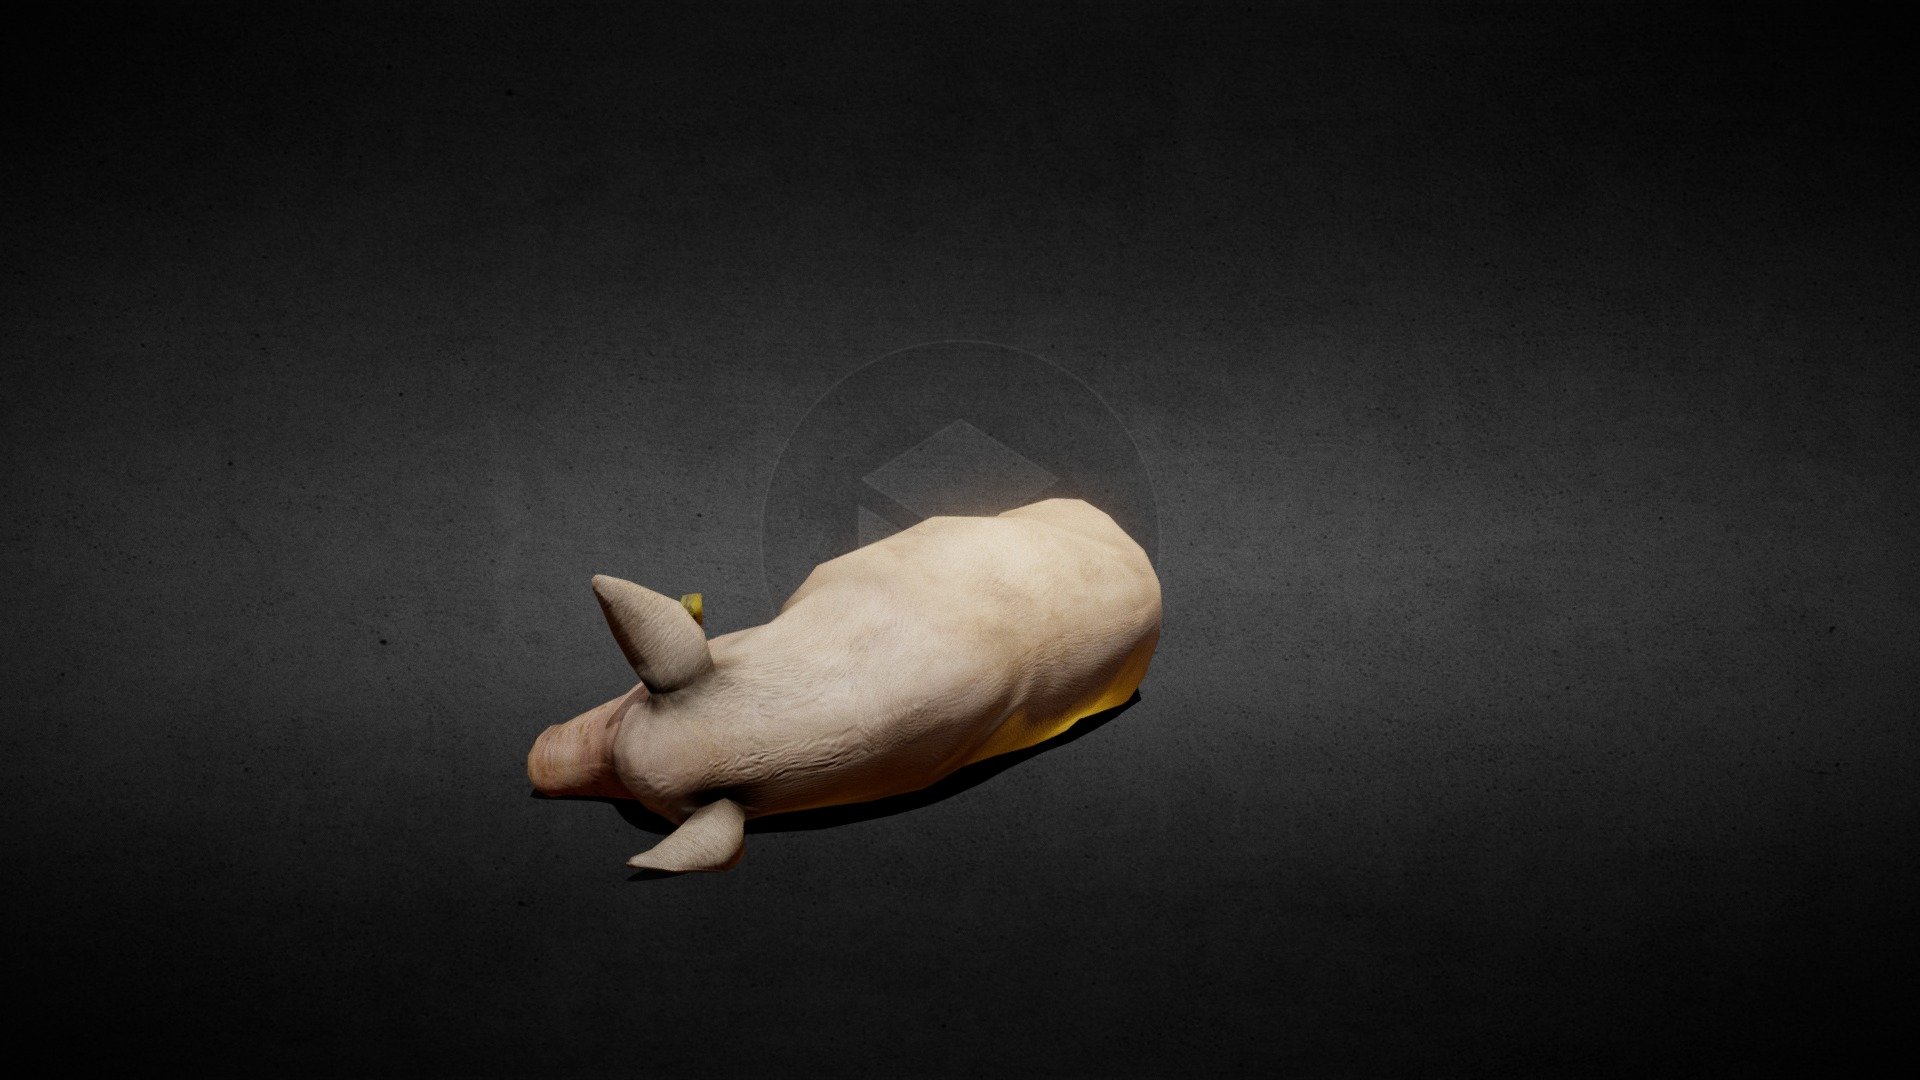 Pig animated
Ready for games - Pig - 3D model by MAXDESIGN-3D (@MAXDESIGN) 3d model